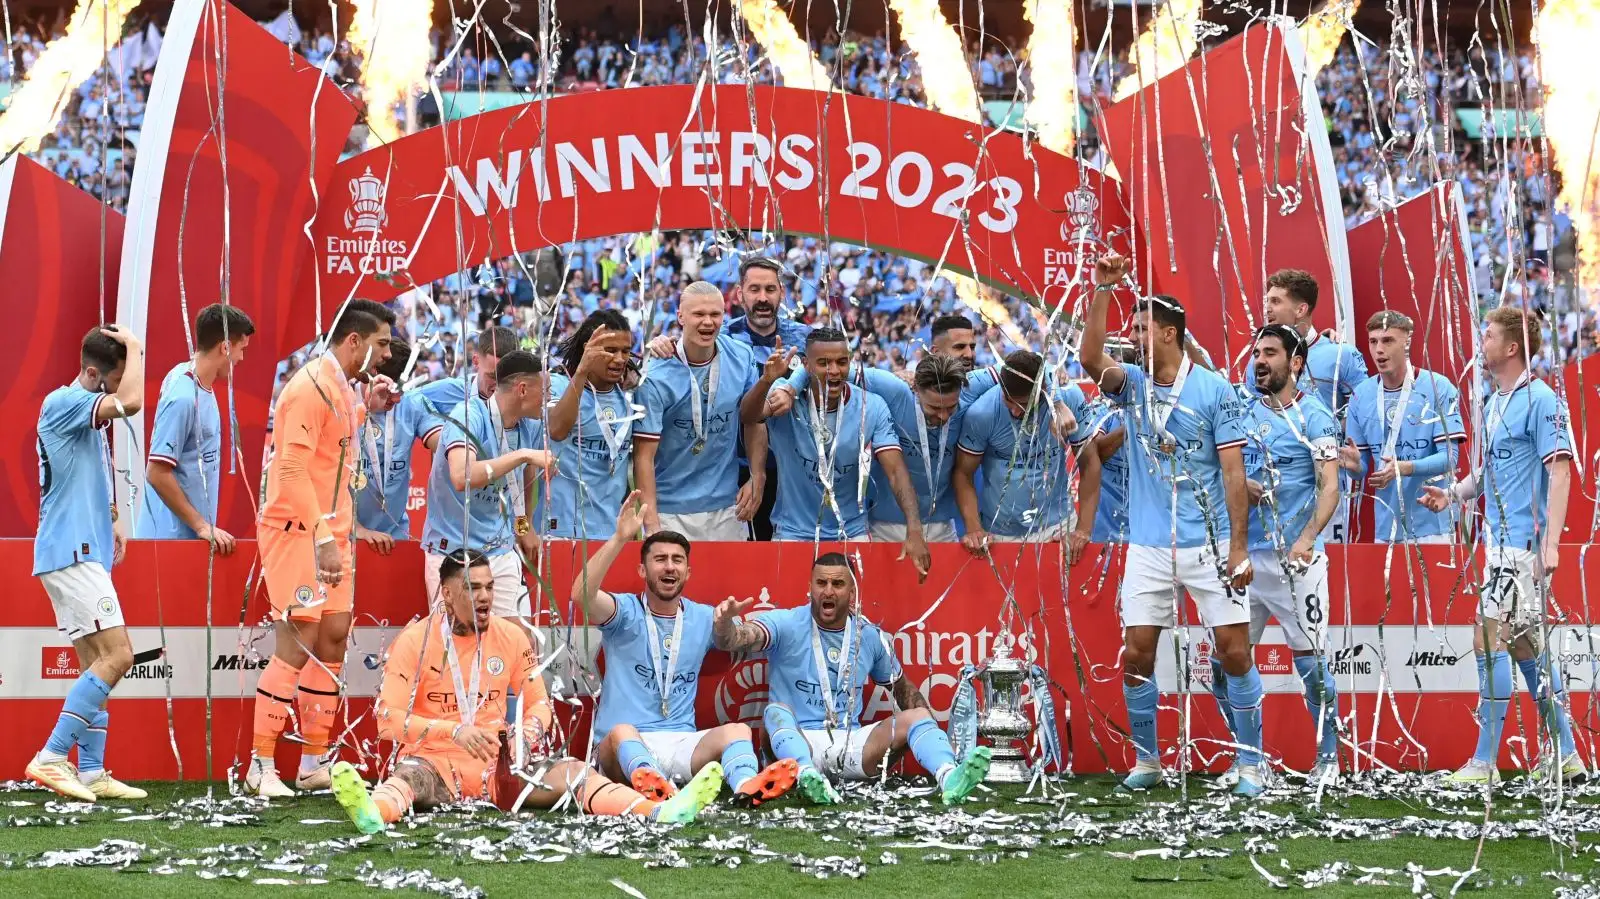 Manchester City celebrate winning the FA Cup after beating Man Utd